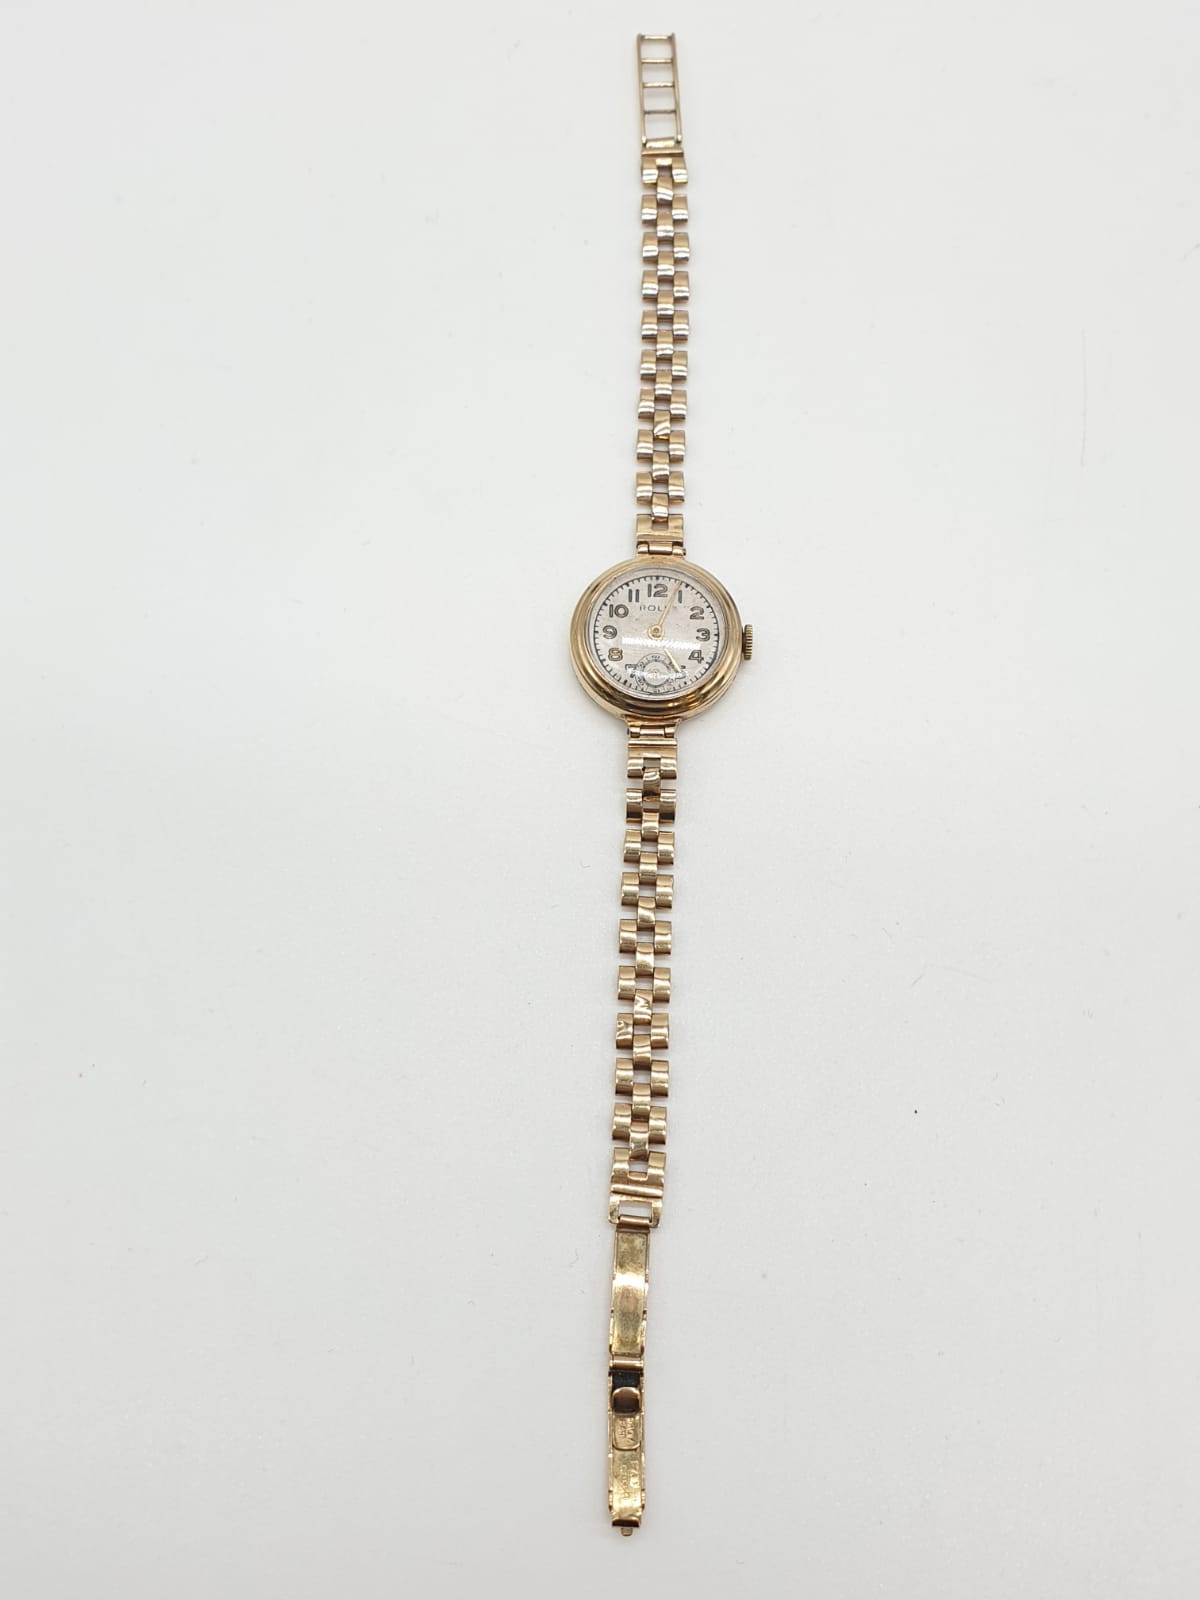 18ct gold Tudor vintage ladies watch, diamonds on each side of face, comes with safety chain and - Image 15 of 21